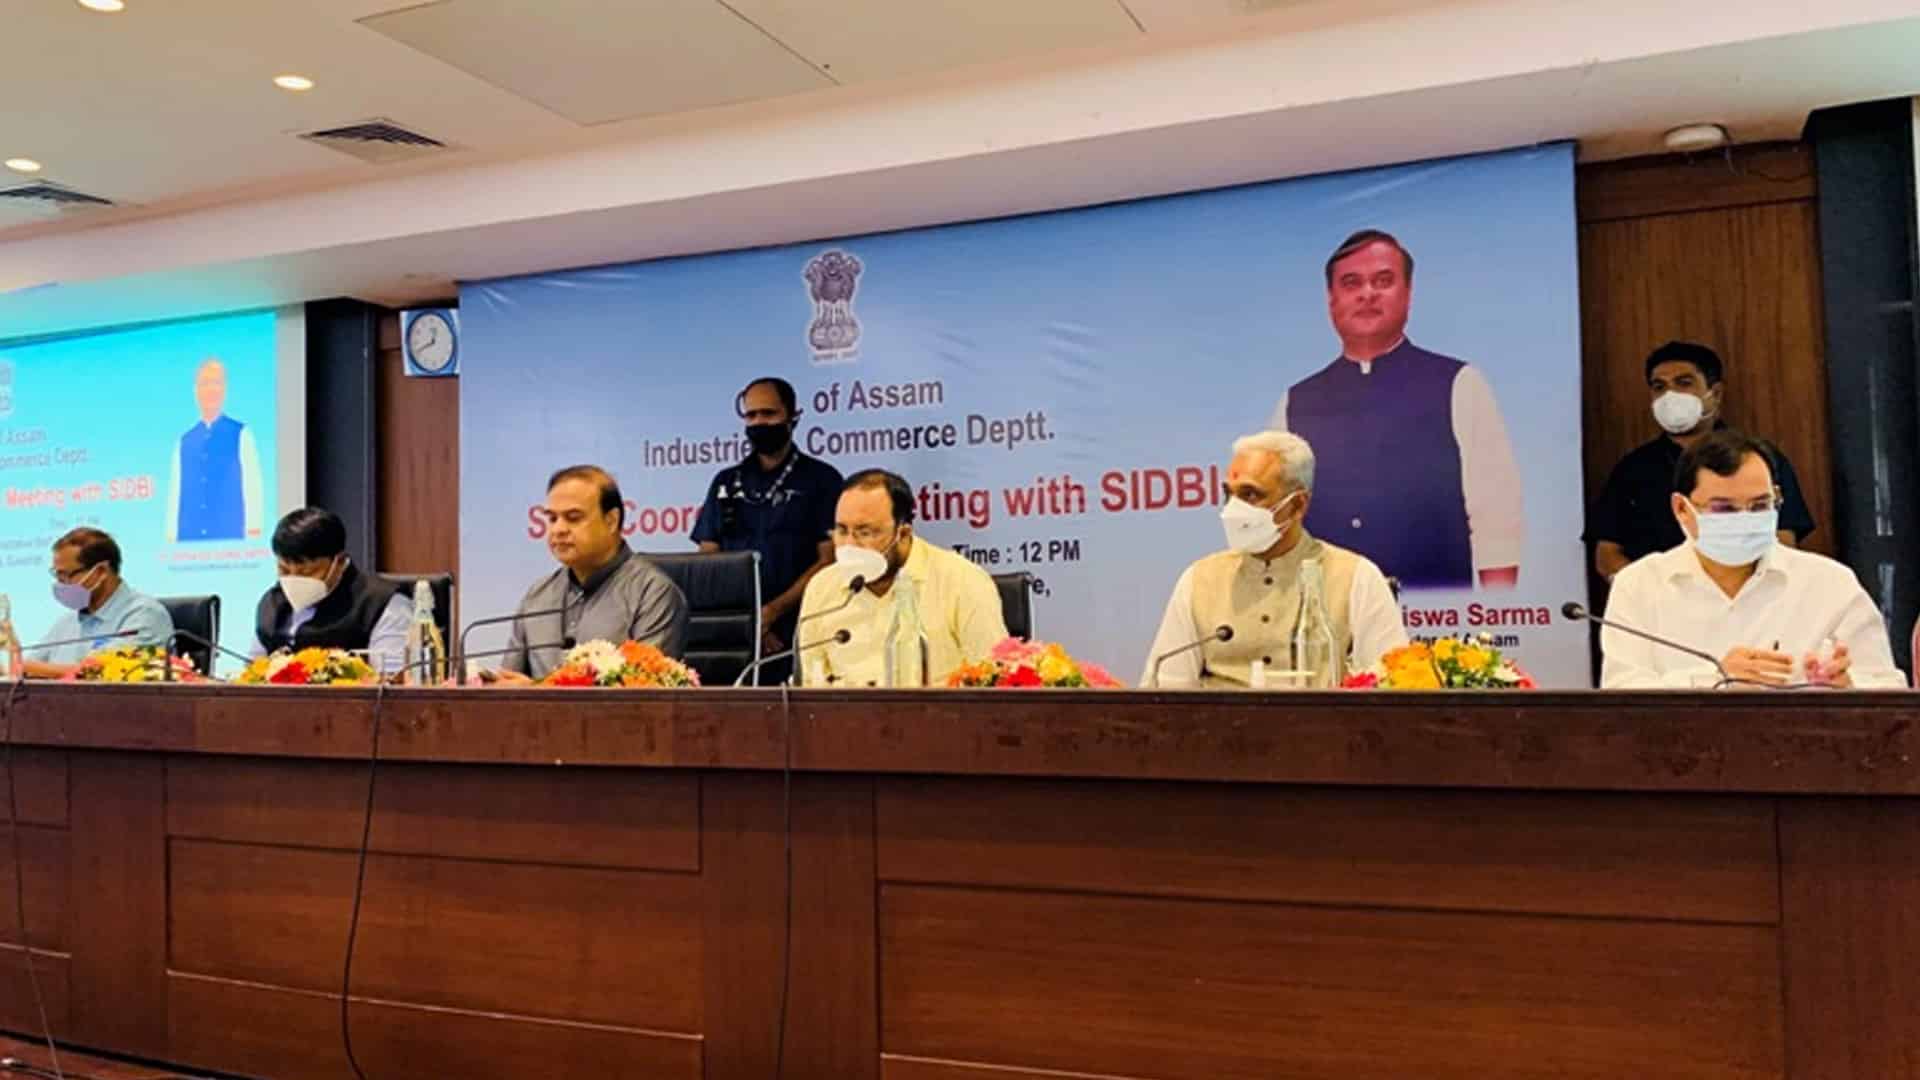 SIDBI tie-up with Assam govt to provide lending support to MSMEs